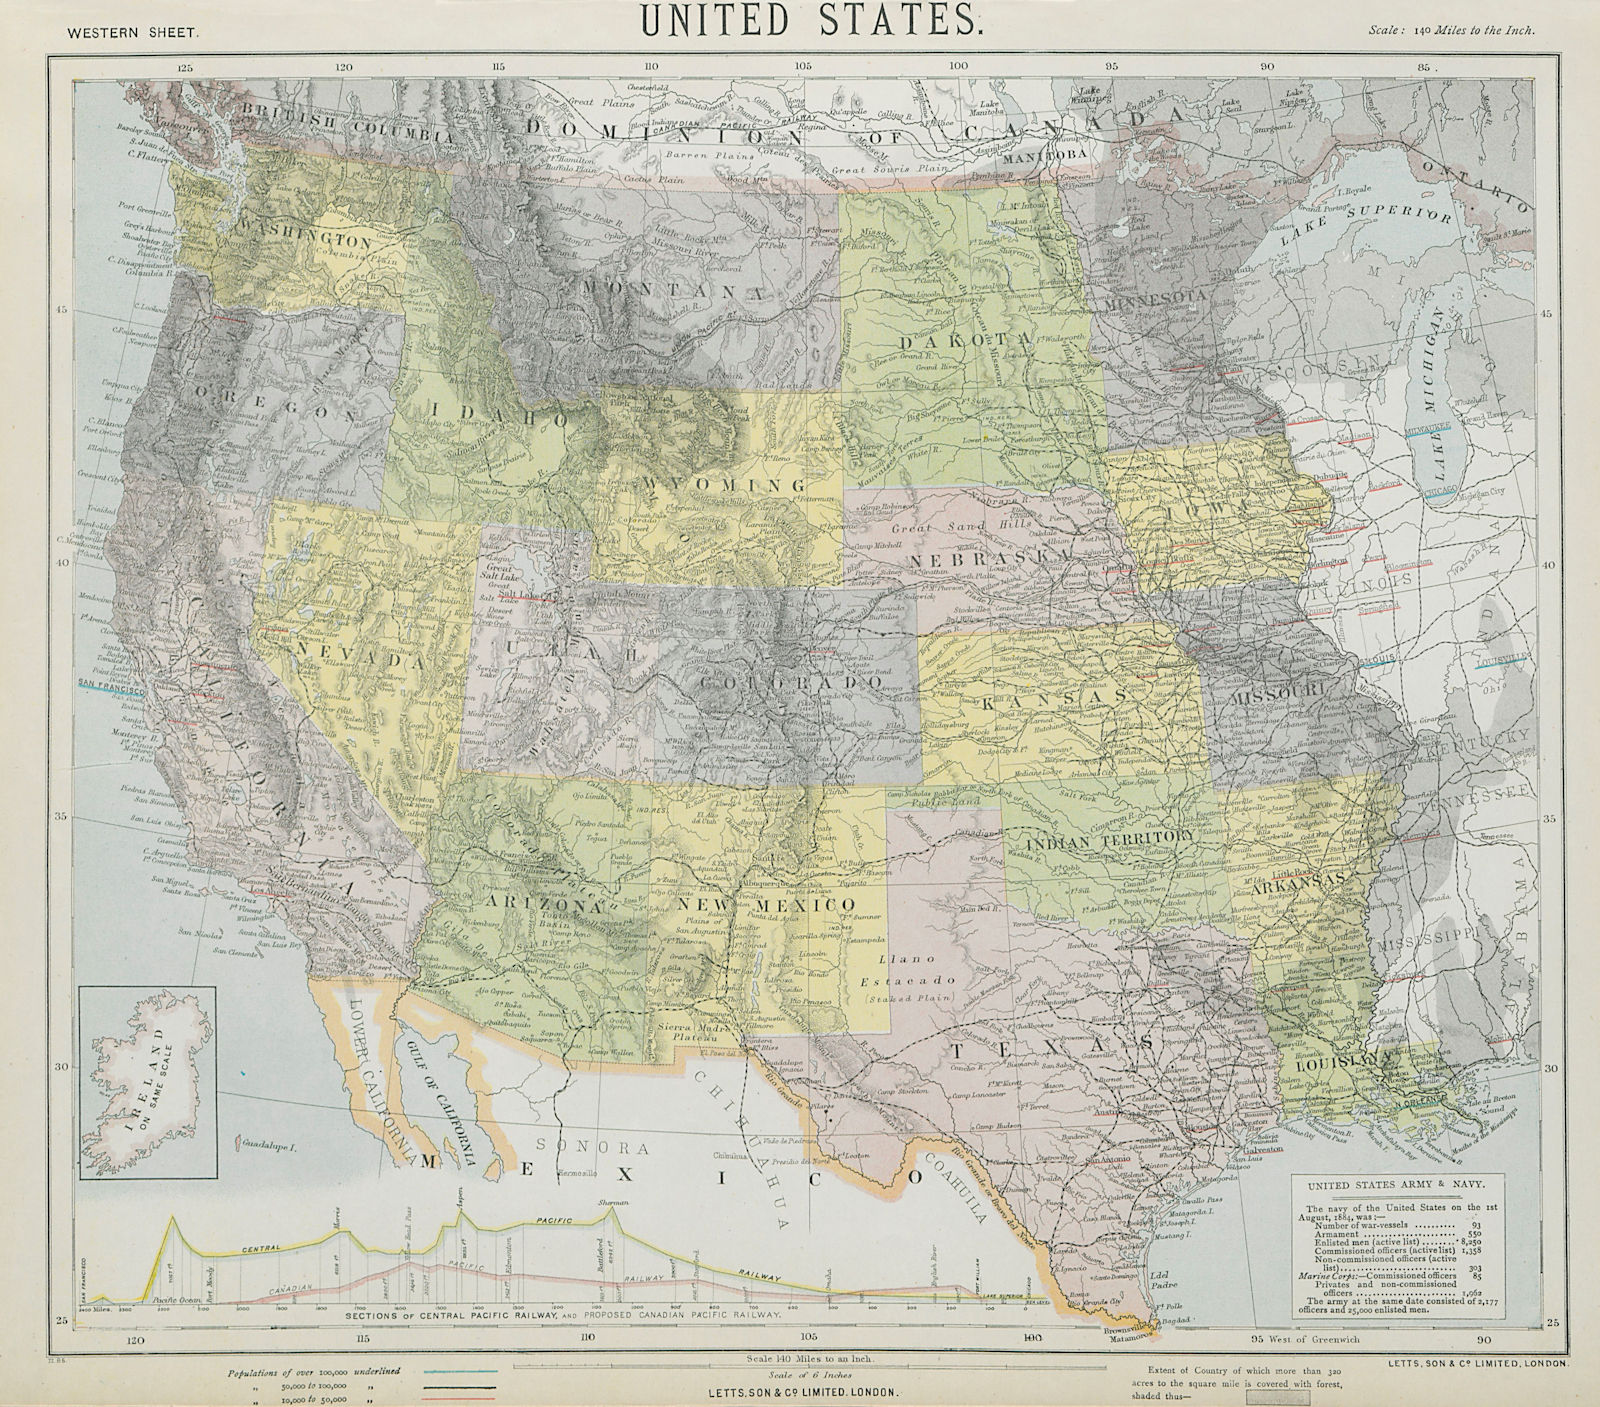 Associate Product WESTERN USA States & territories Central Pacific Railroad section LETTS 1884 map